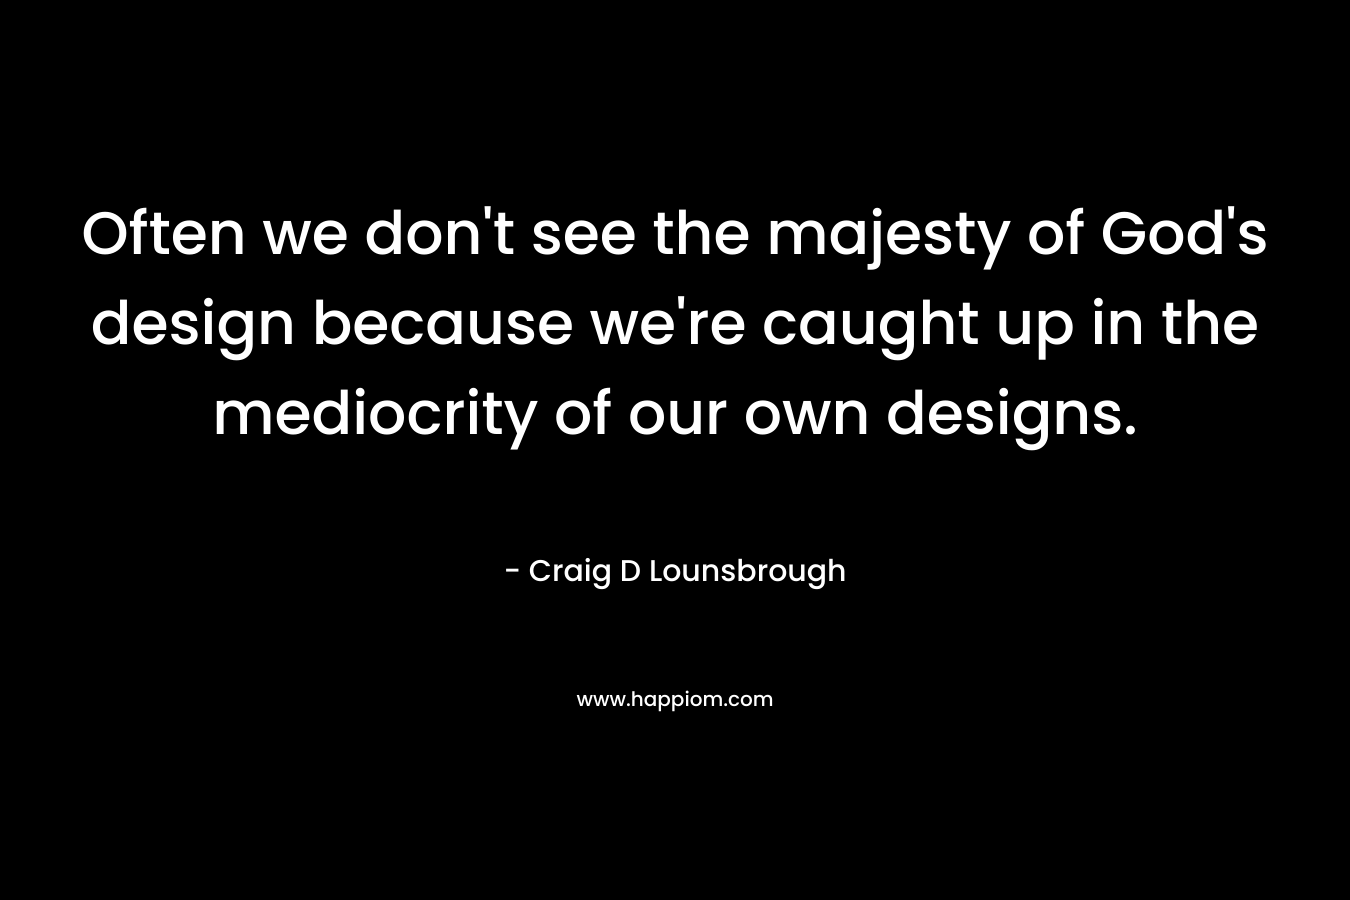 Often we don’t see the majesty of God’s design because we’re caught up in the mediocrity of our own designs. – Craig D Lounsbrough